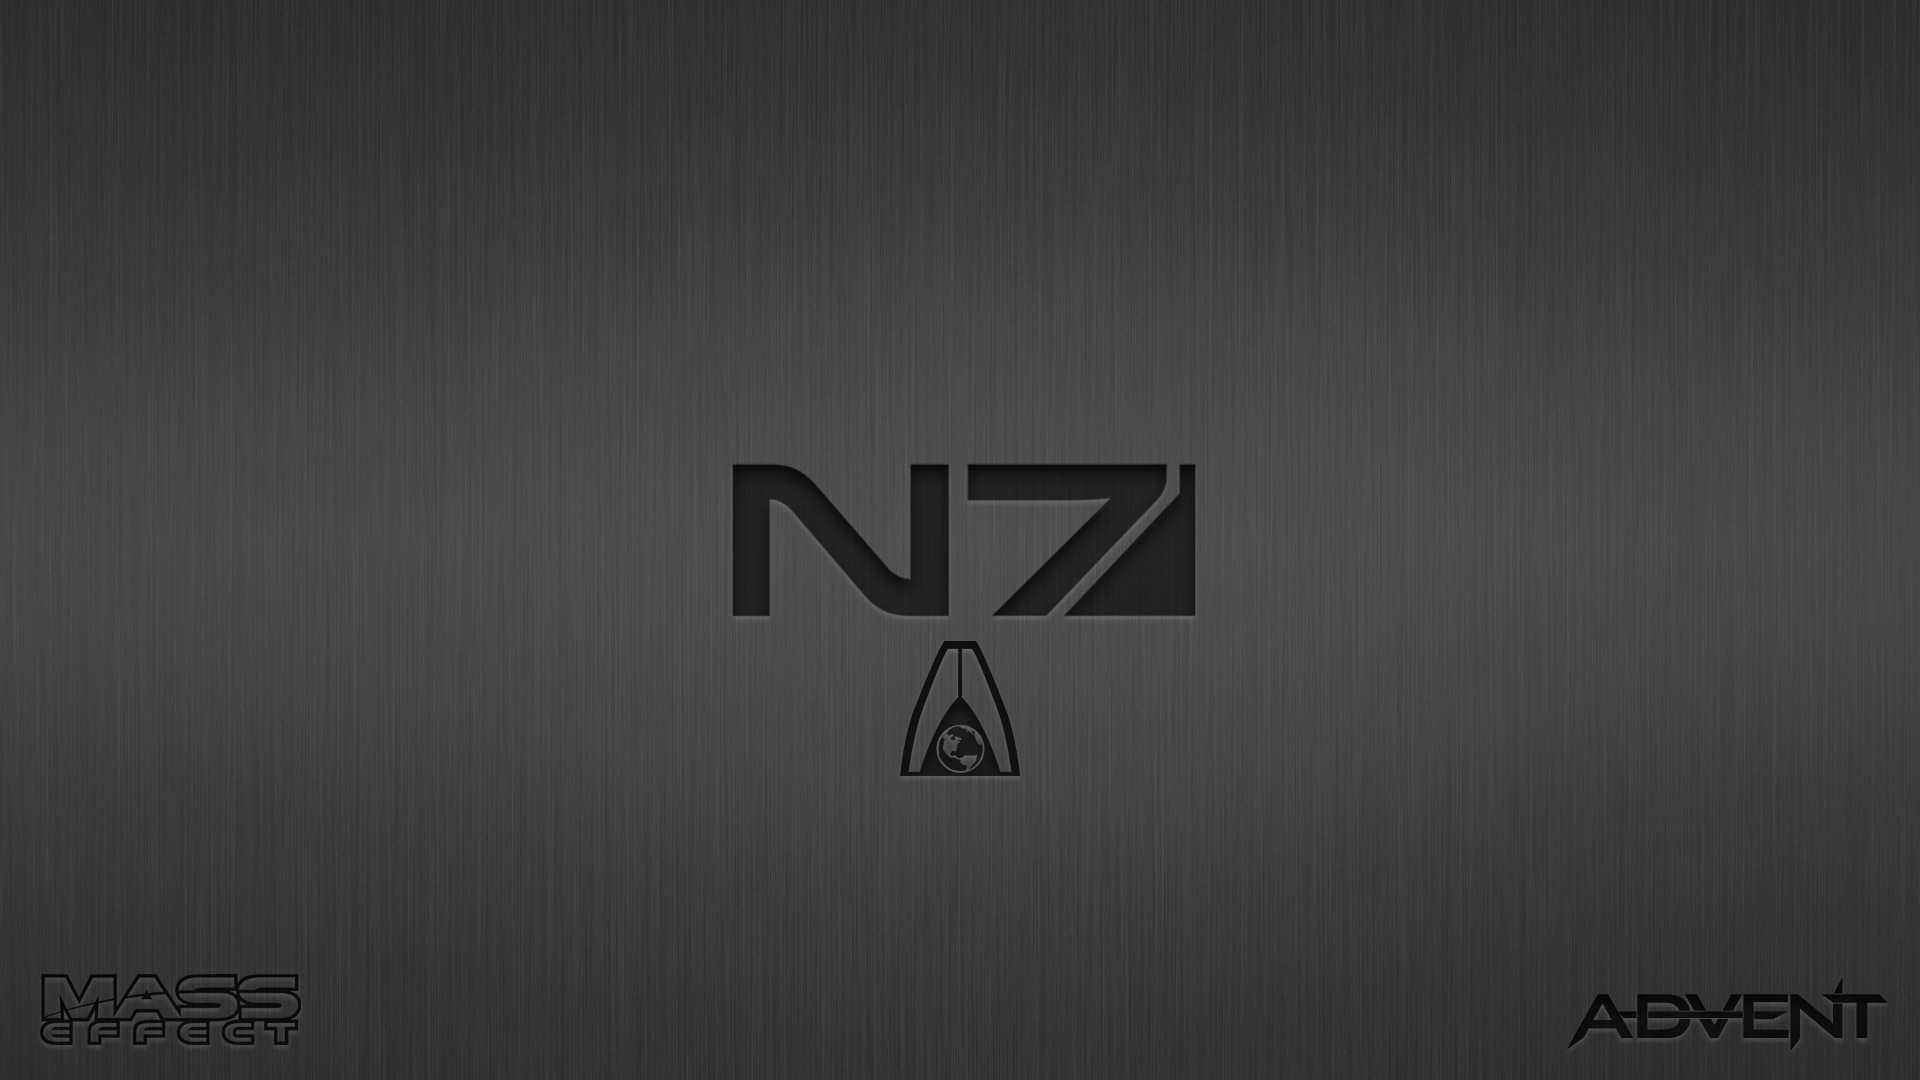 N7Day Wallpaper - Mass Effect - Advent Designs by AdventDesigns